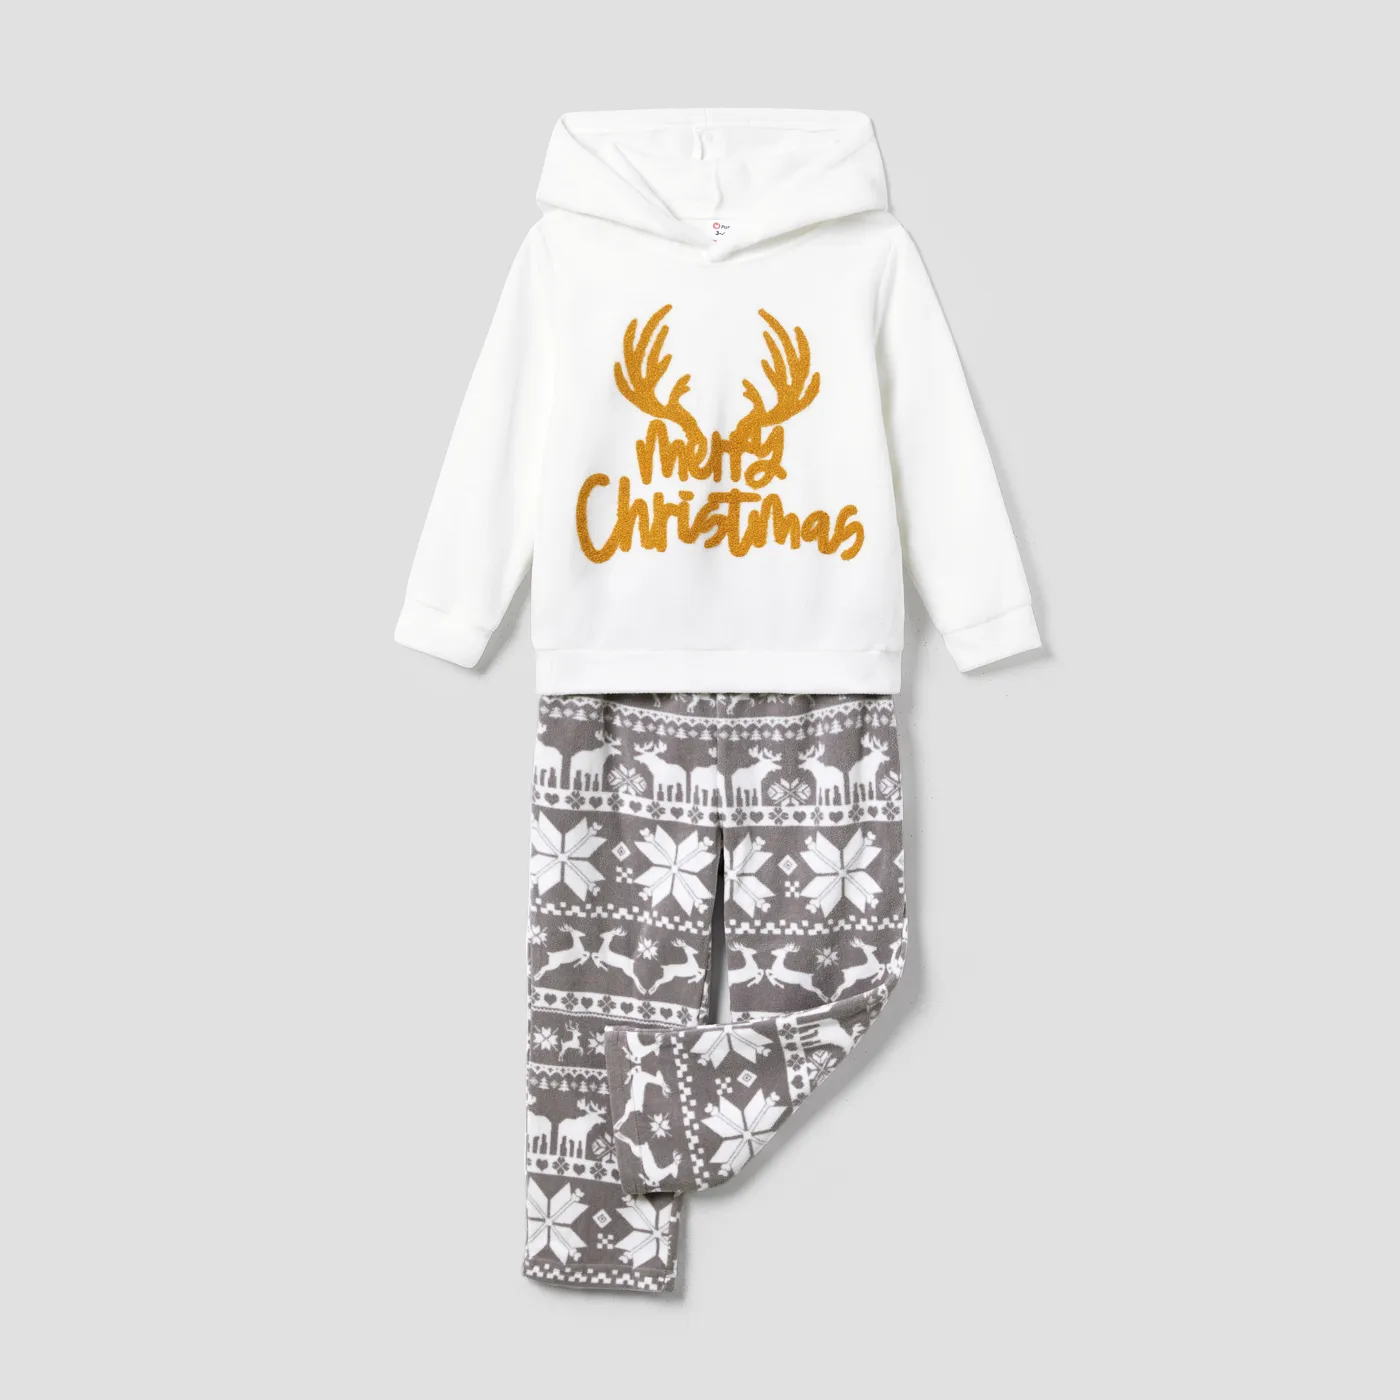 Christmas Family Matching Letters Embroidered Long-sleeve Hooded Fleece Pajamas Sets(Flame resistant